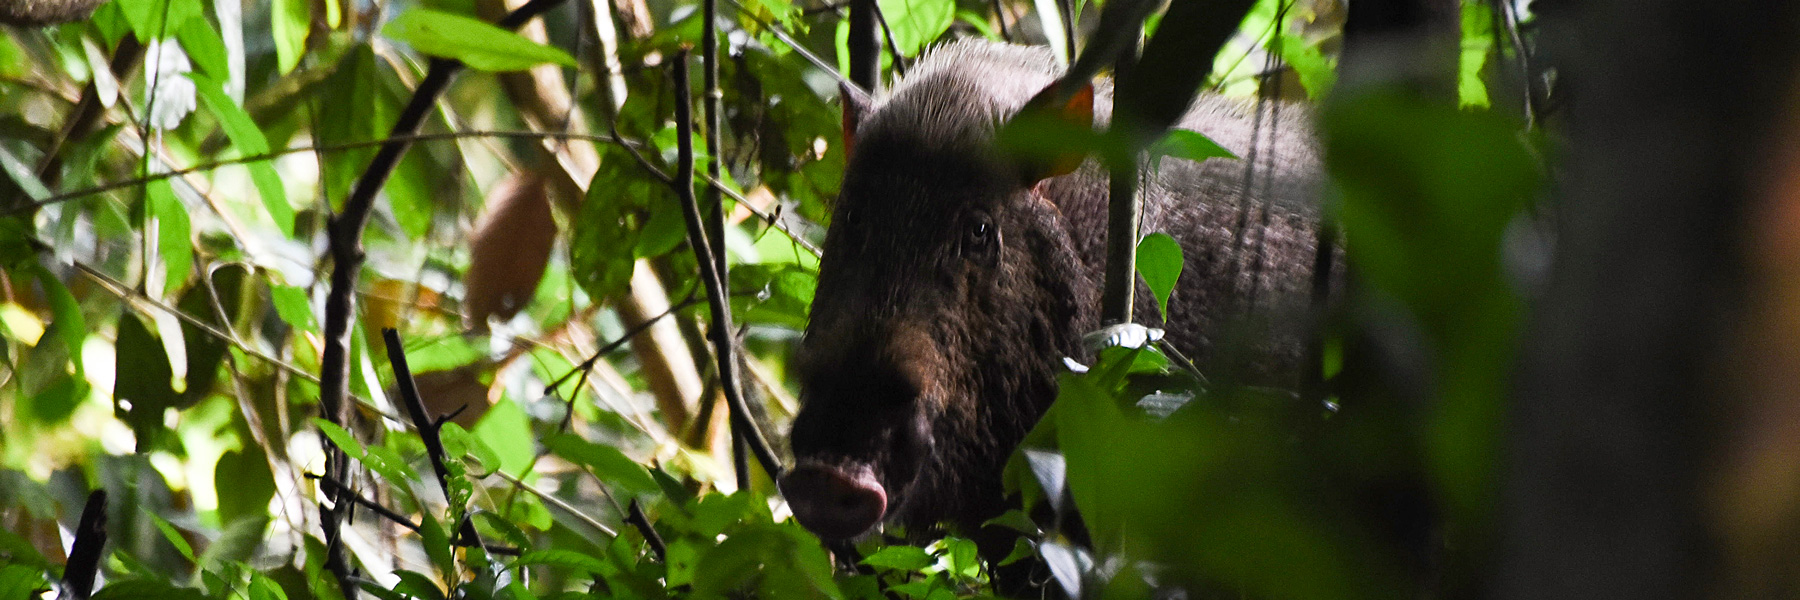 A bearded pig peeks through green foliage in the jungles of Borneo